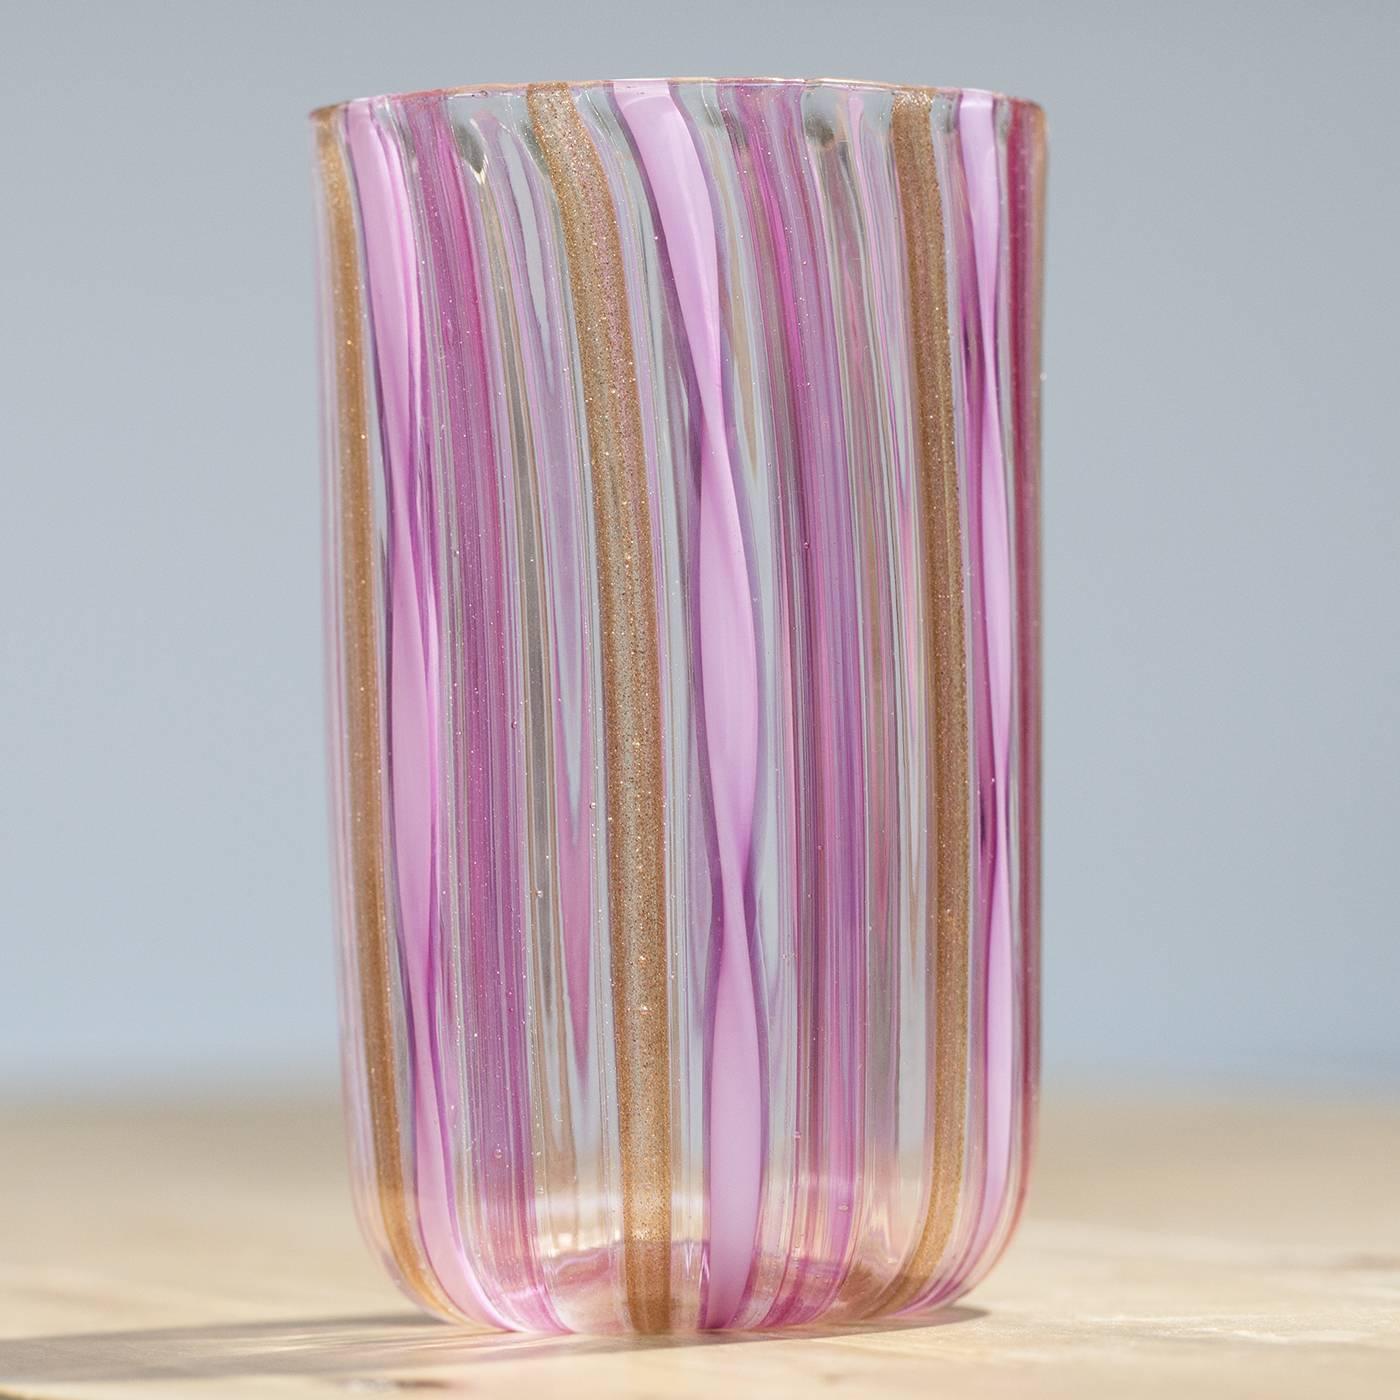 Set of six filigree Murano glasses made with the "a Canna" technique, where canes of colored glass are melted into a clear glass base. This beautiful pink and gold set includes six glasses entirely handcrafted on the Venetian island of